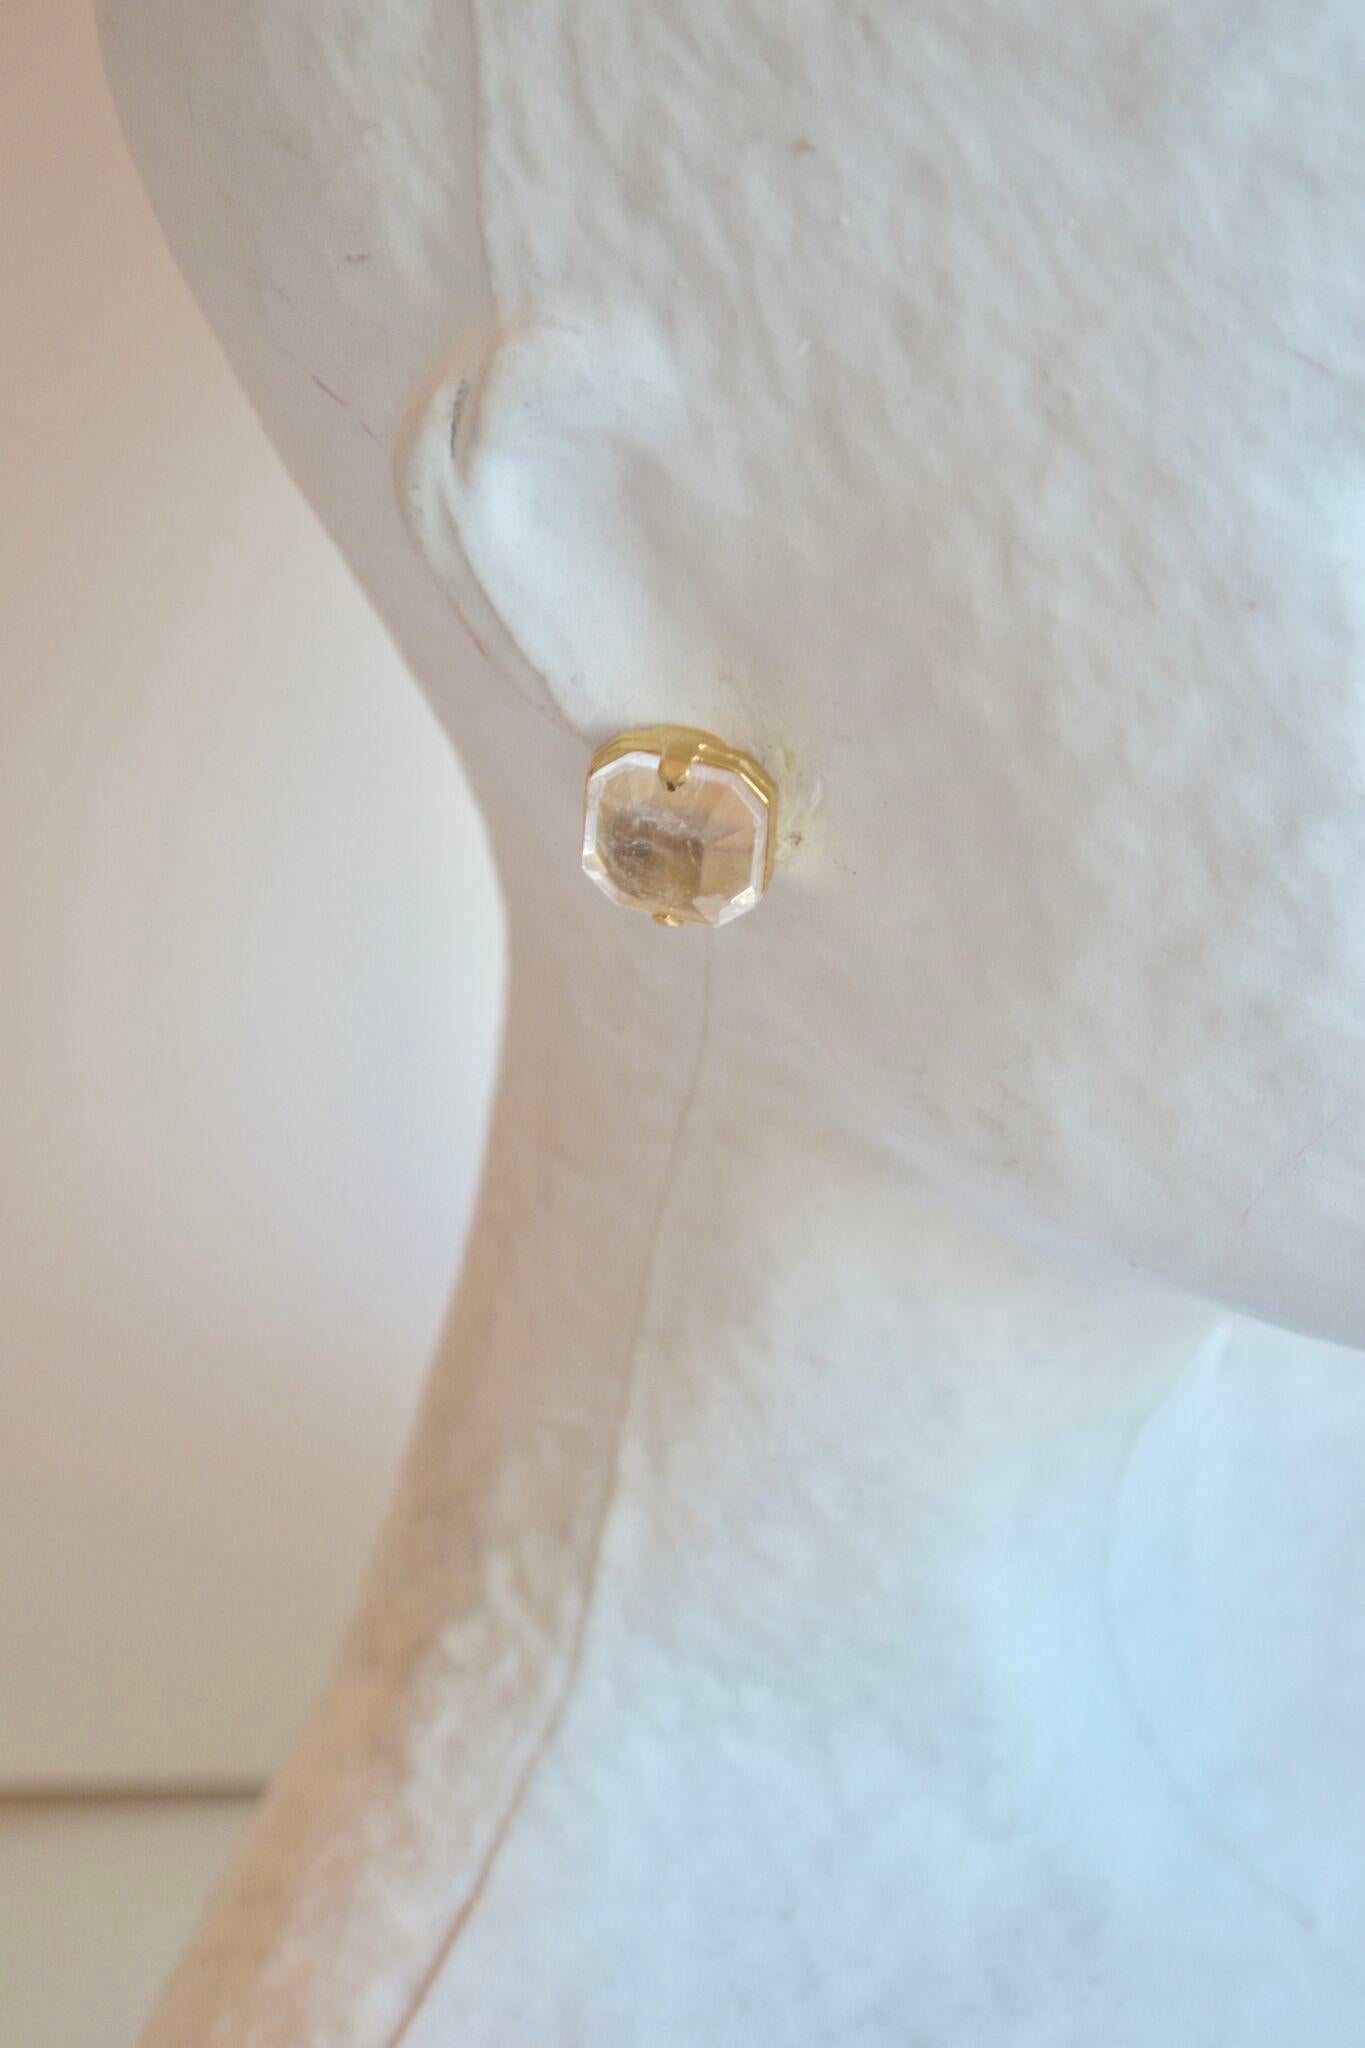 Clip earrings made with 24karat gold plated brass, natural rock crystal.
Stones are cut by hand for the house of Goossens 